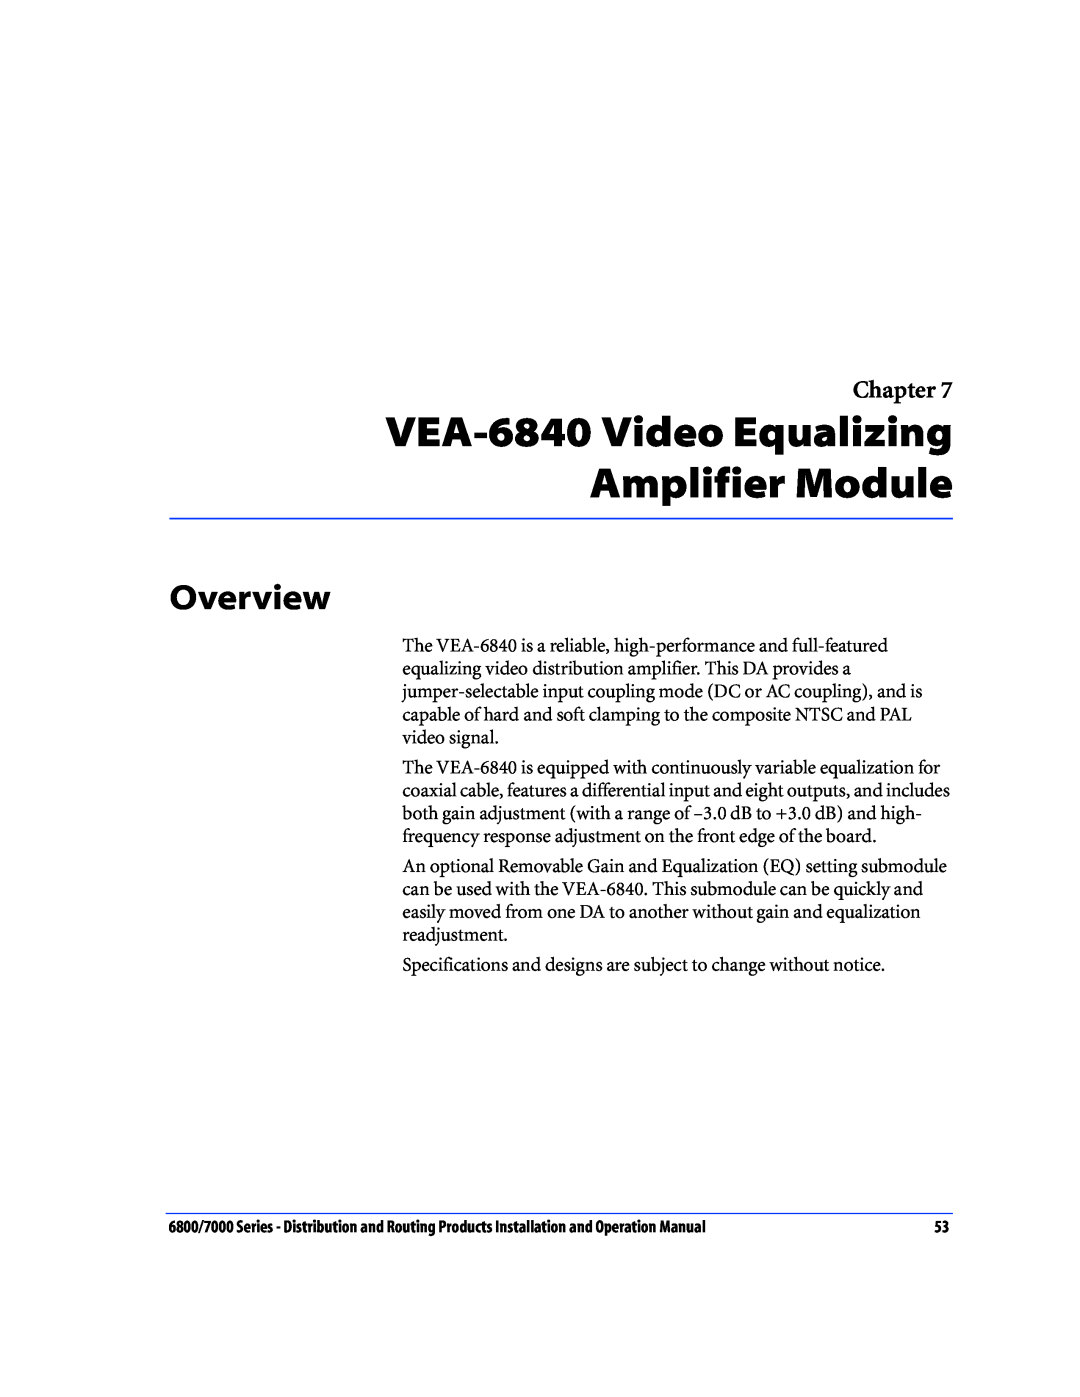 Nokia 6800 Series, 7000 Series operation manual VEA-6840 Video Equalizing Amplifier Module, Overview, Chapter 